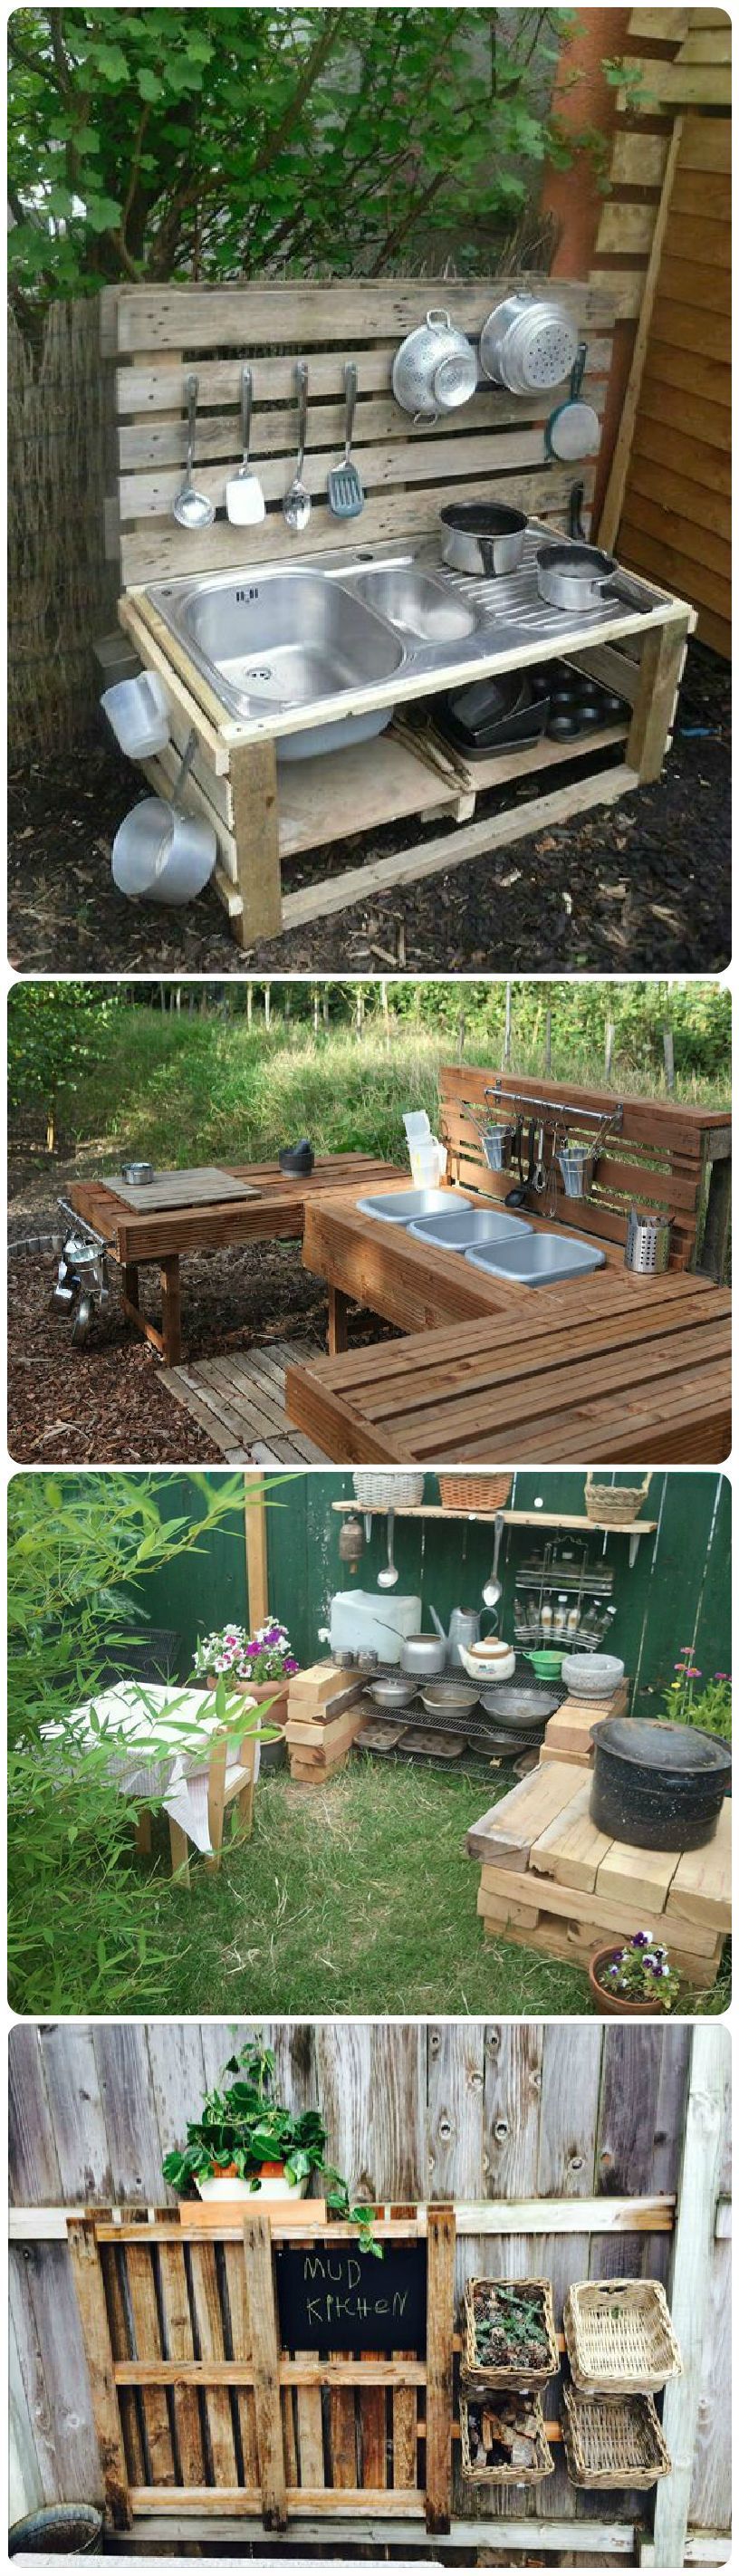 20 mud kitchen ideas Oh what I would have given to had one of these when I was a kid, actually, wouldn’t mind a functioning one